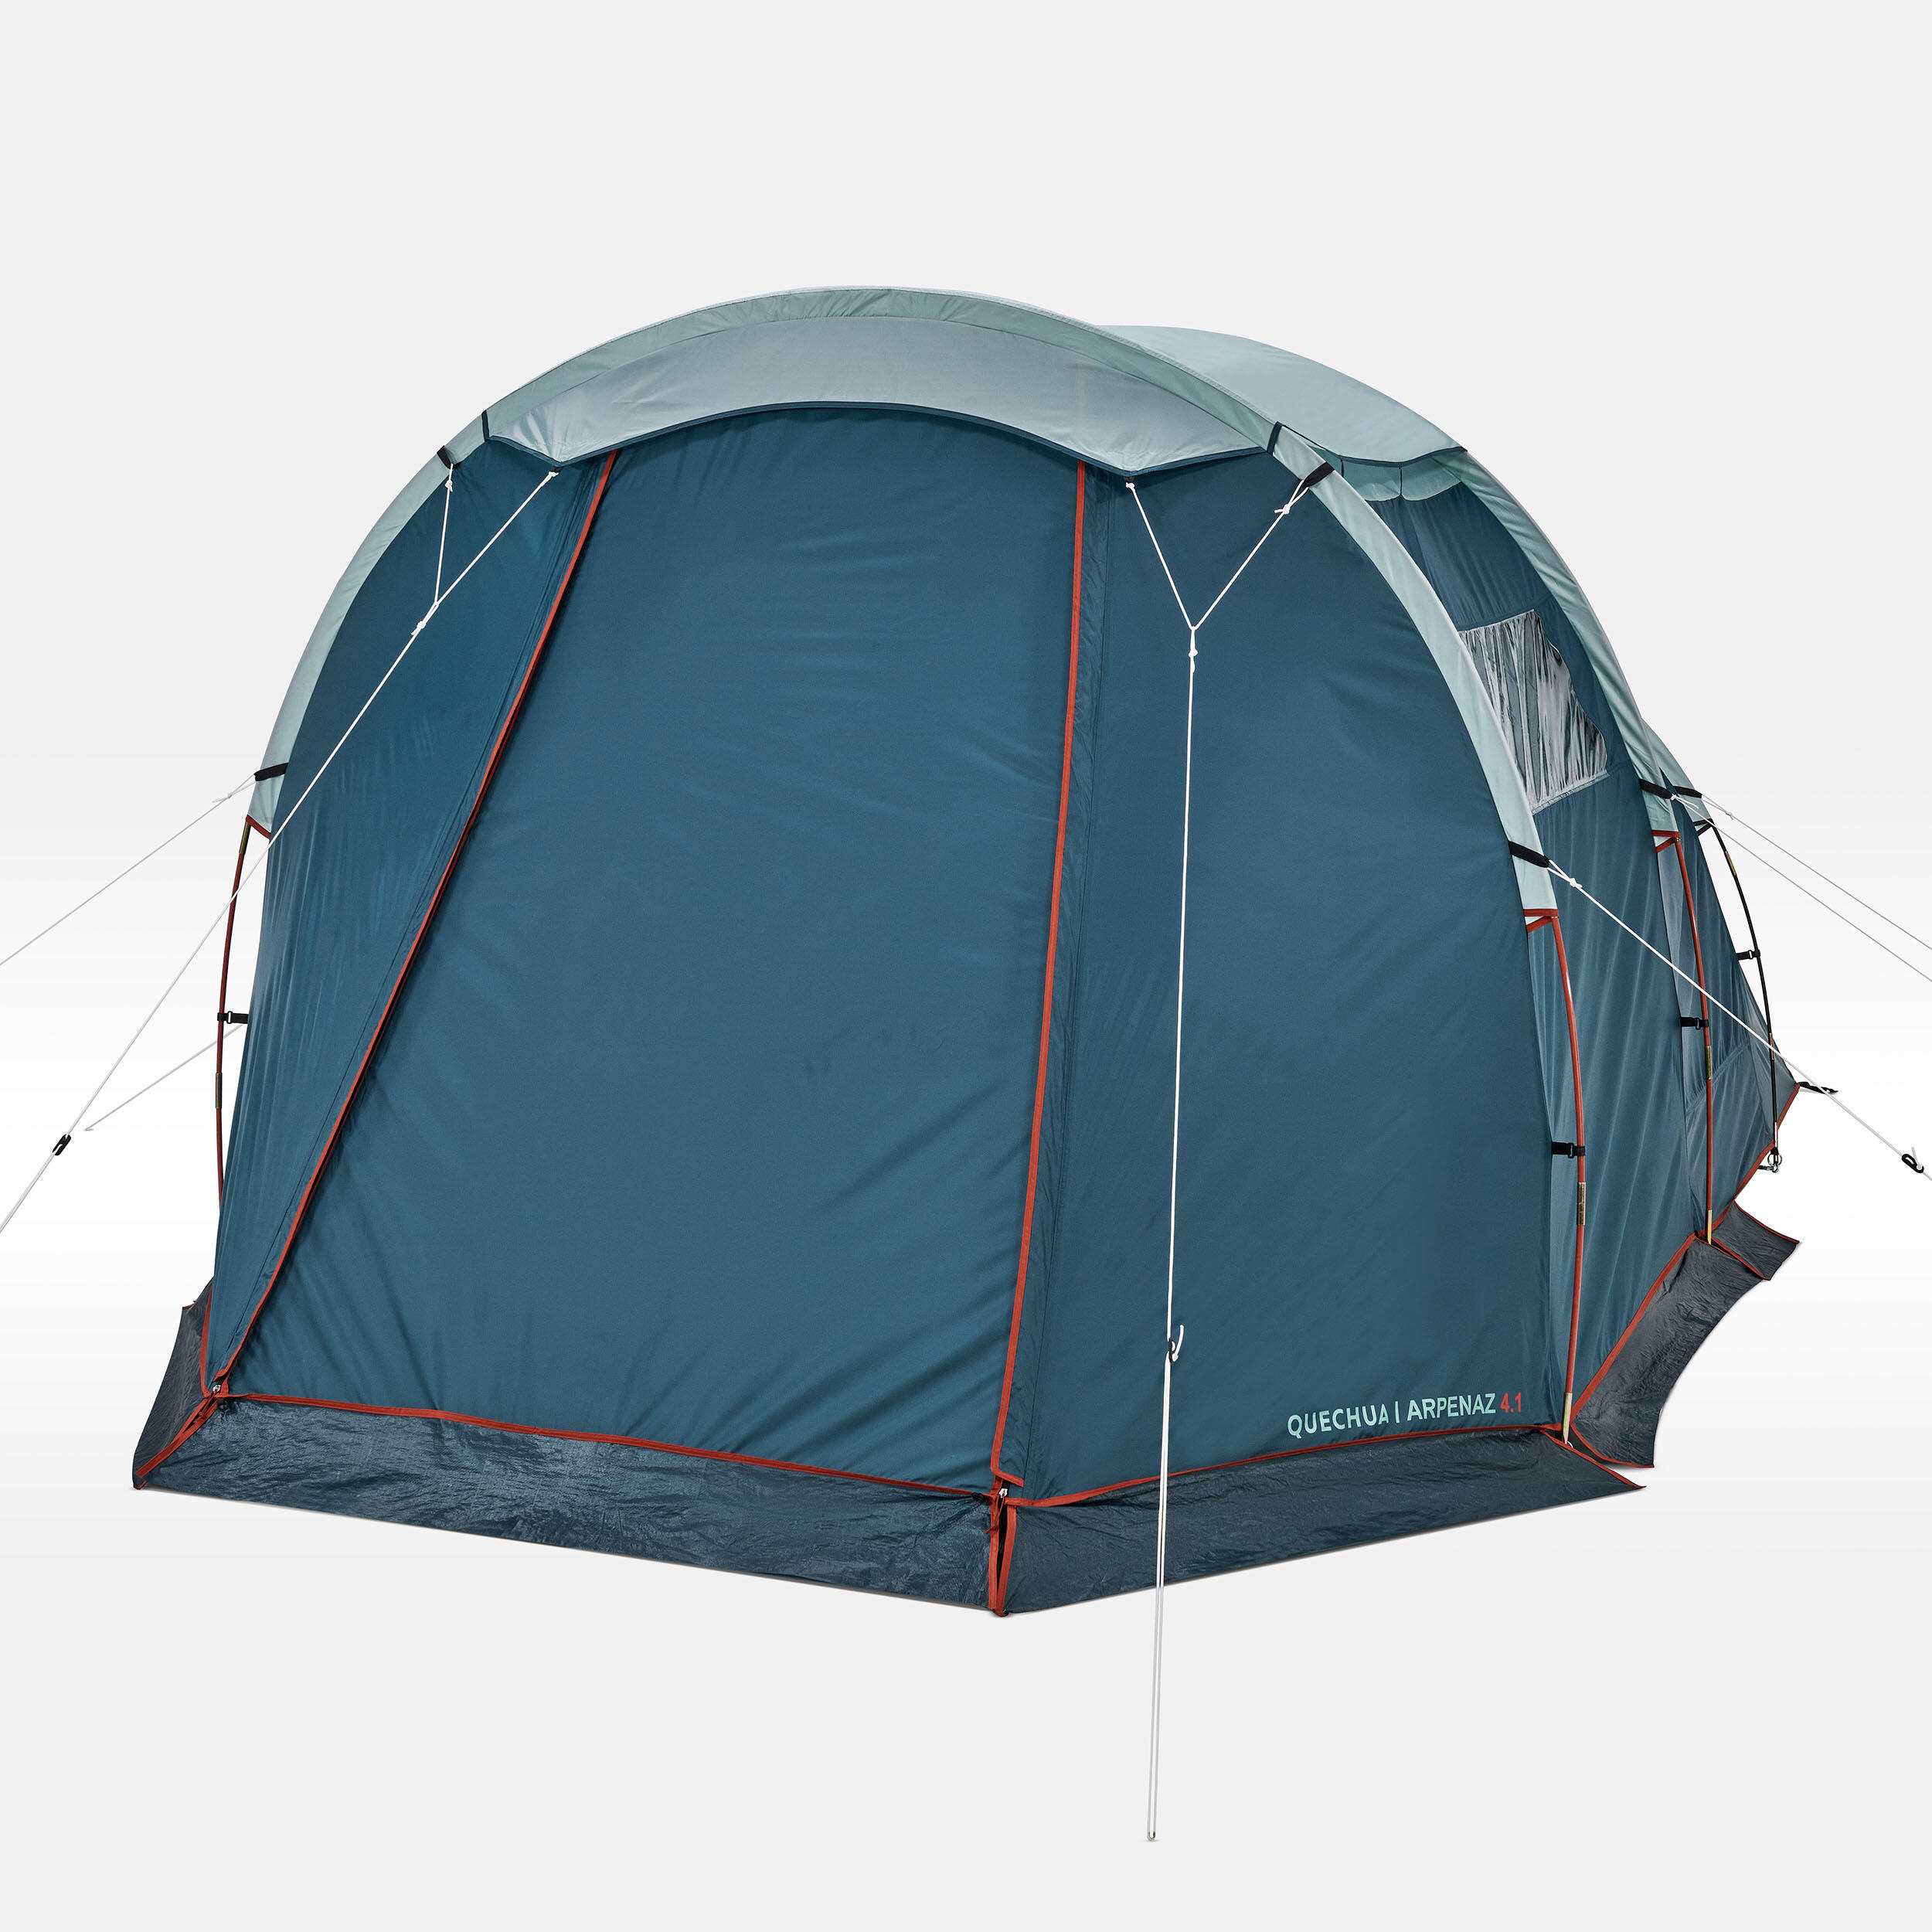 Camping tent with poles - Arpenaz 4.1 - 4 Person - 1 Bedroom 7/17